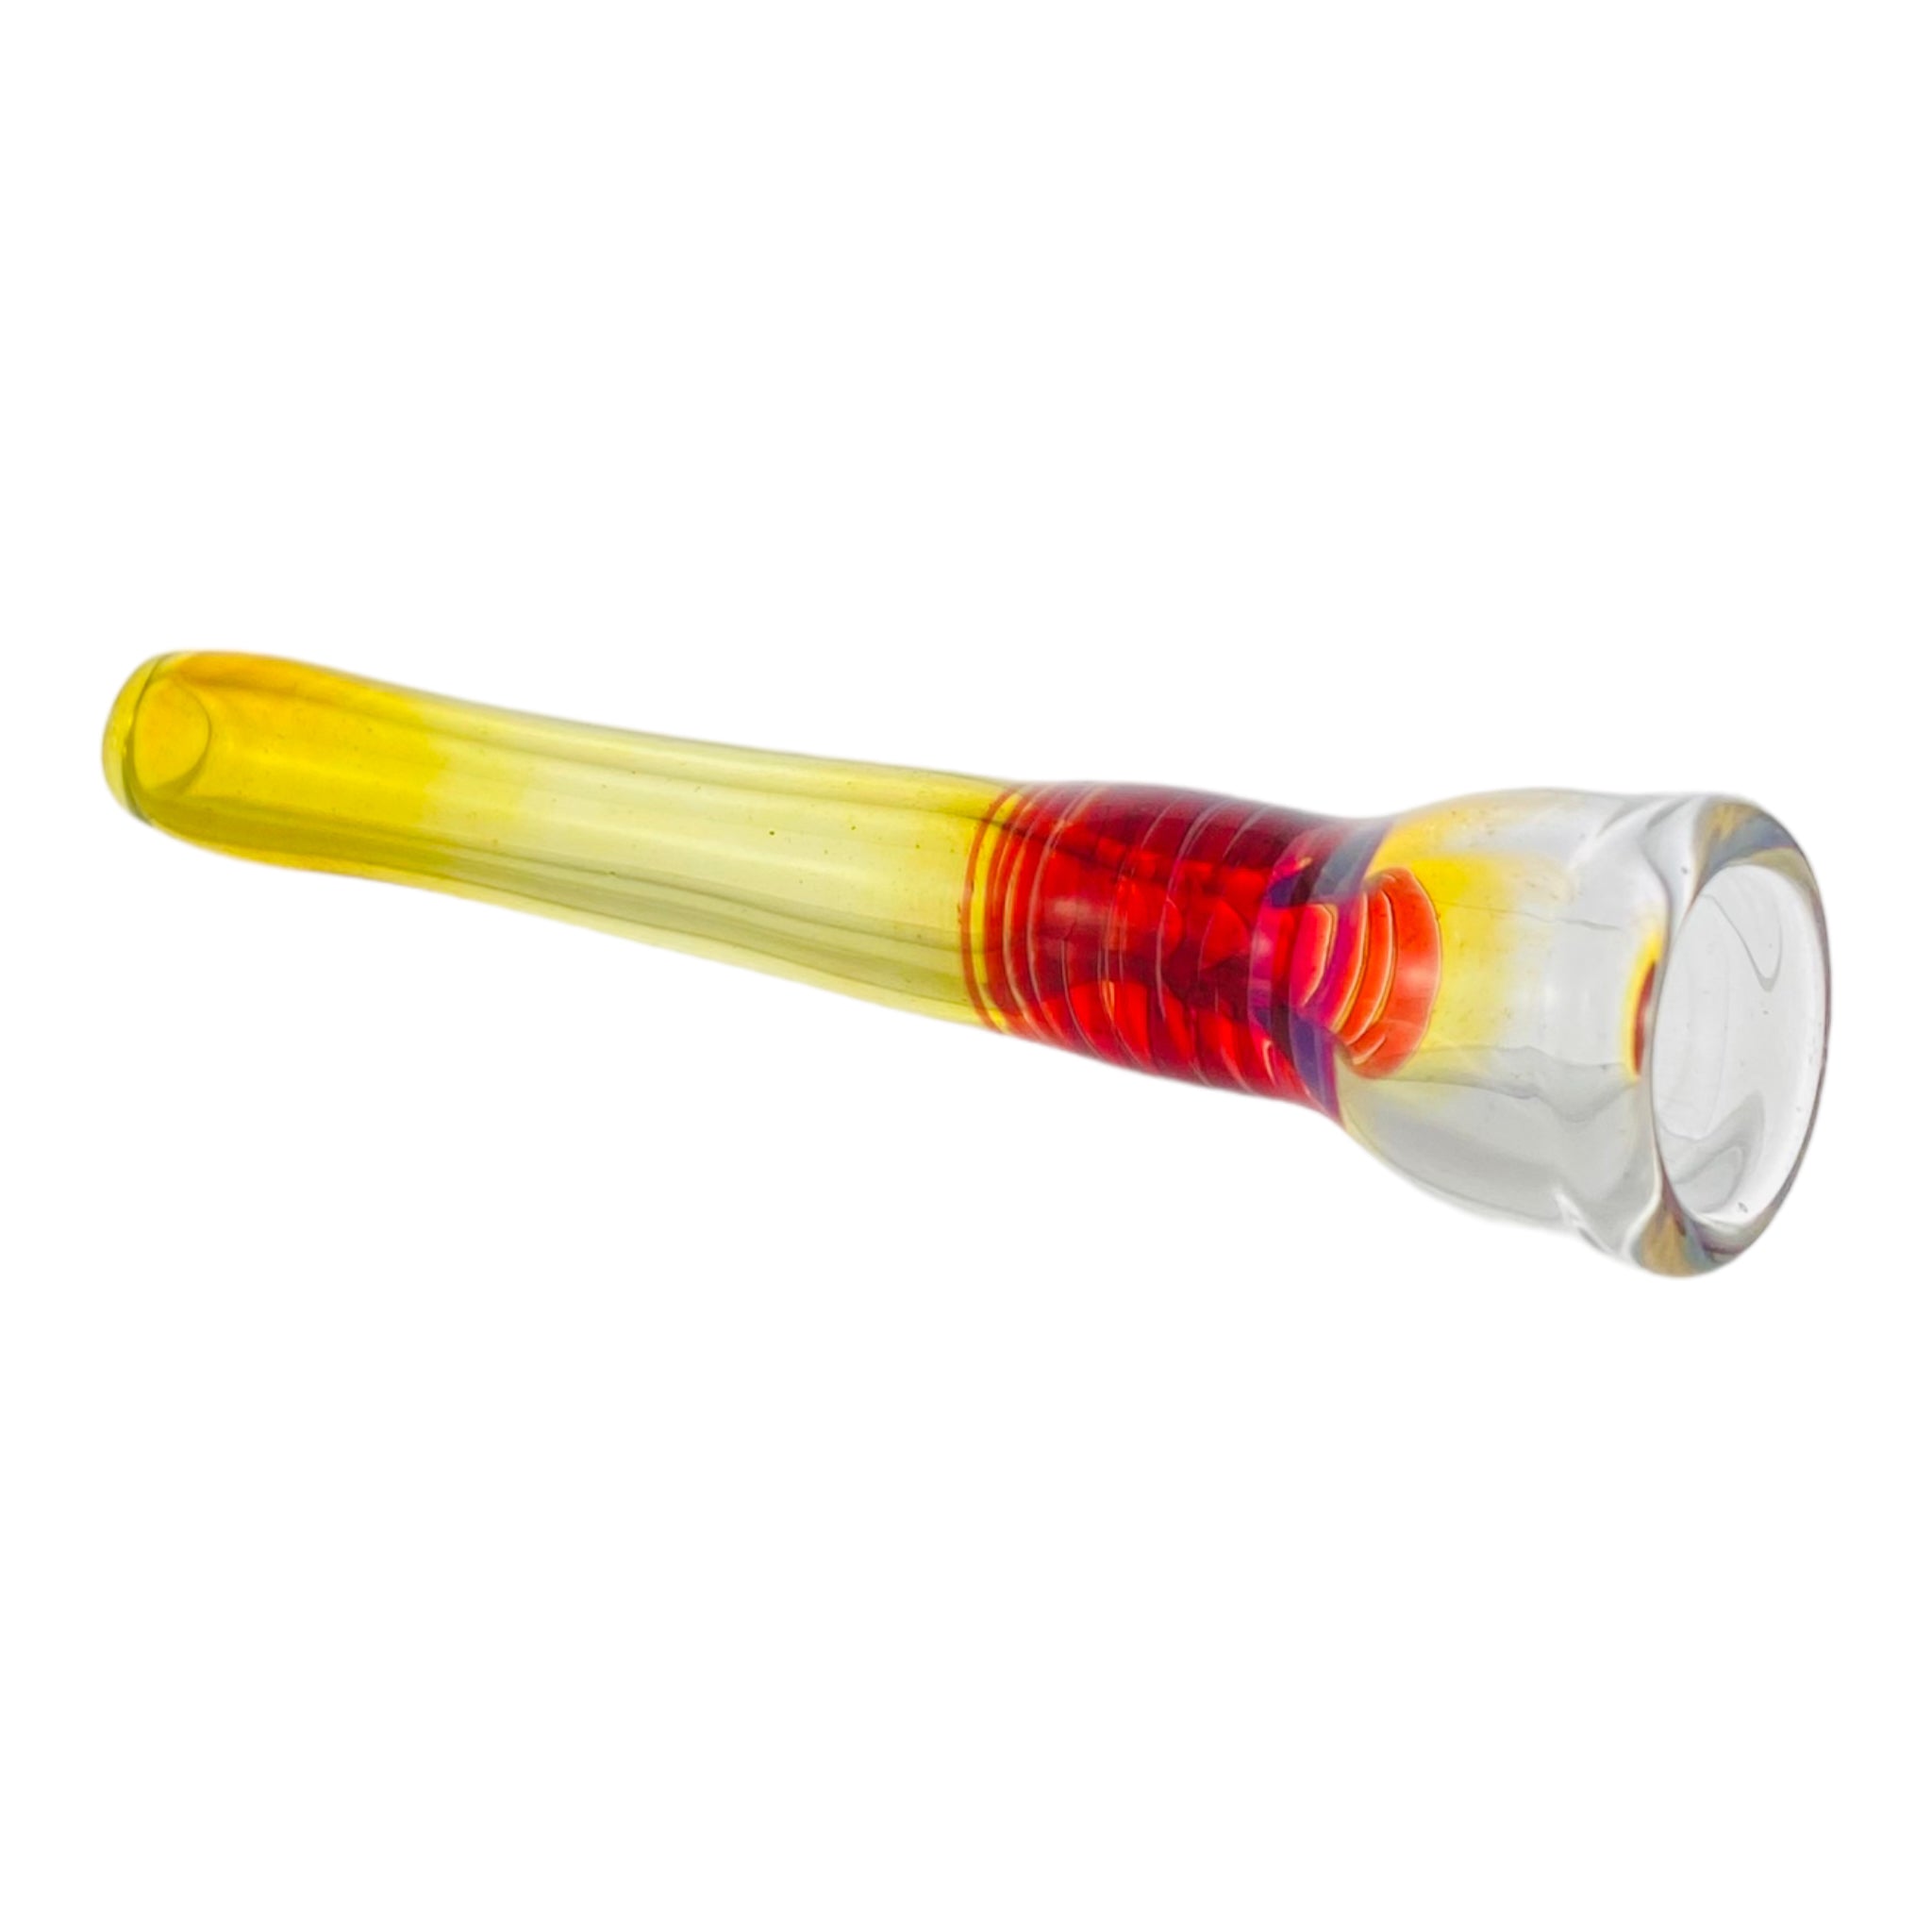 Glass Chillum Pipe - Yellow Silver Fuming With Red Wrap